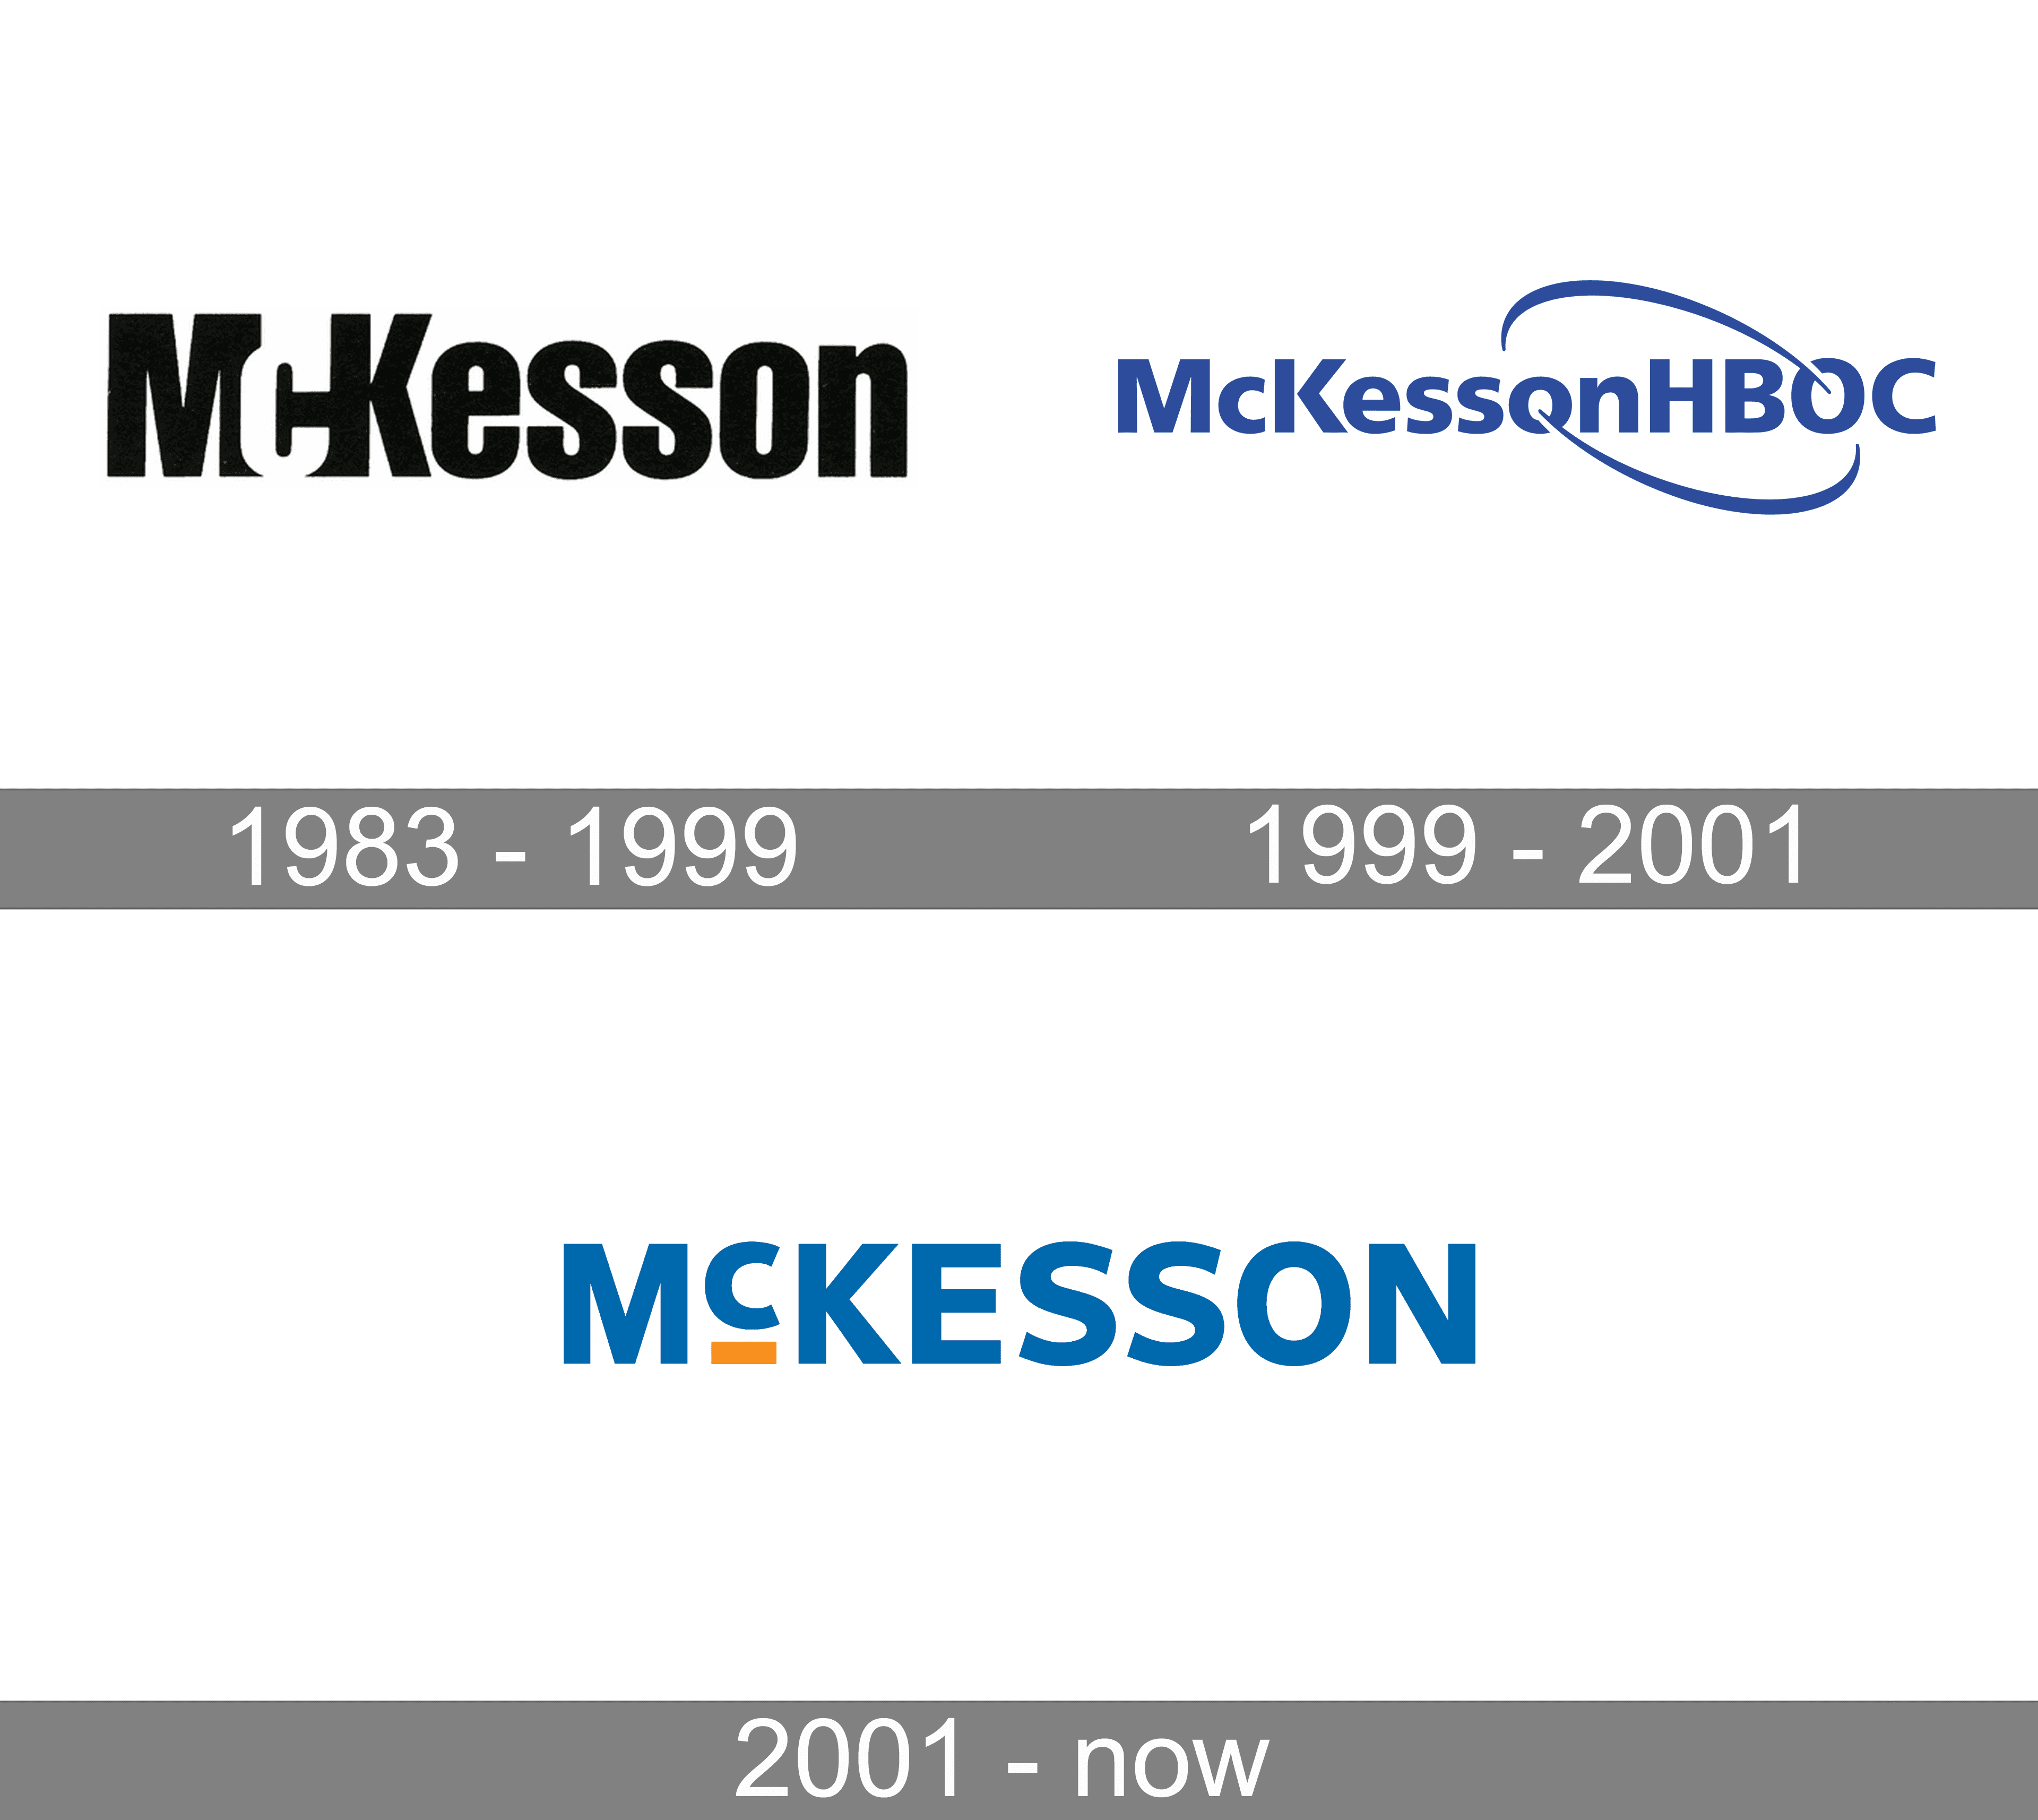 What brands does McKesson make?